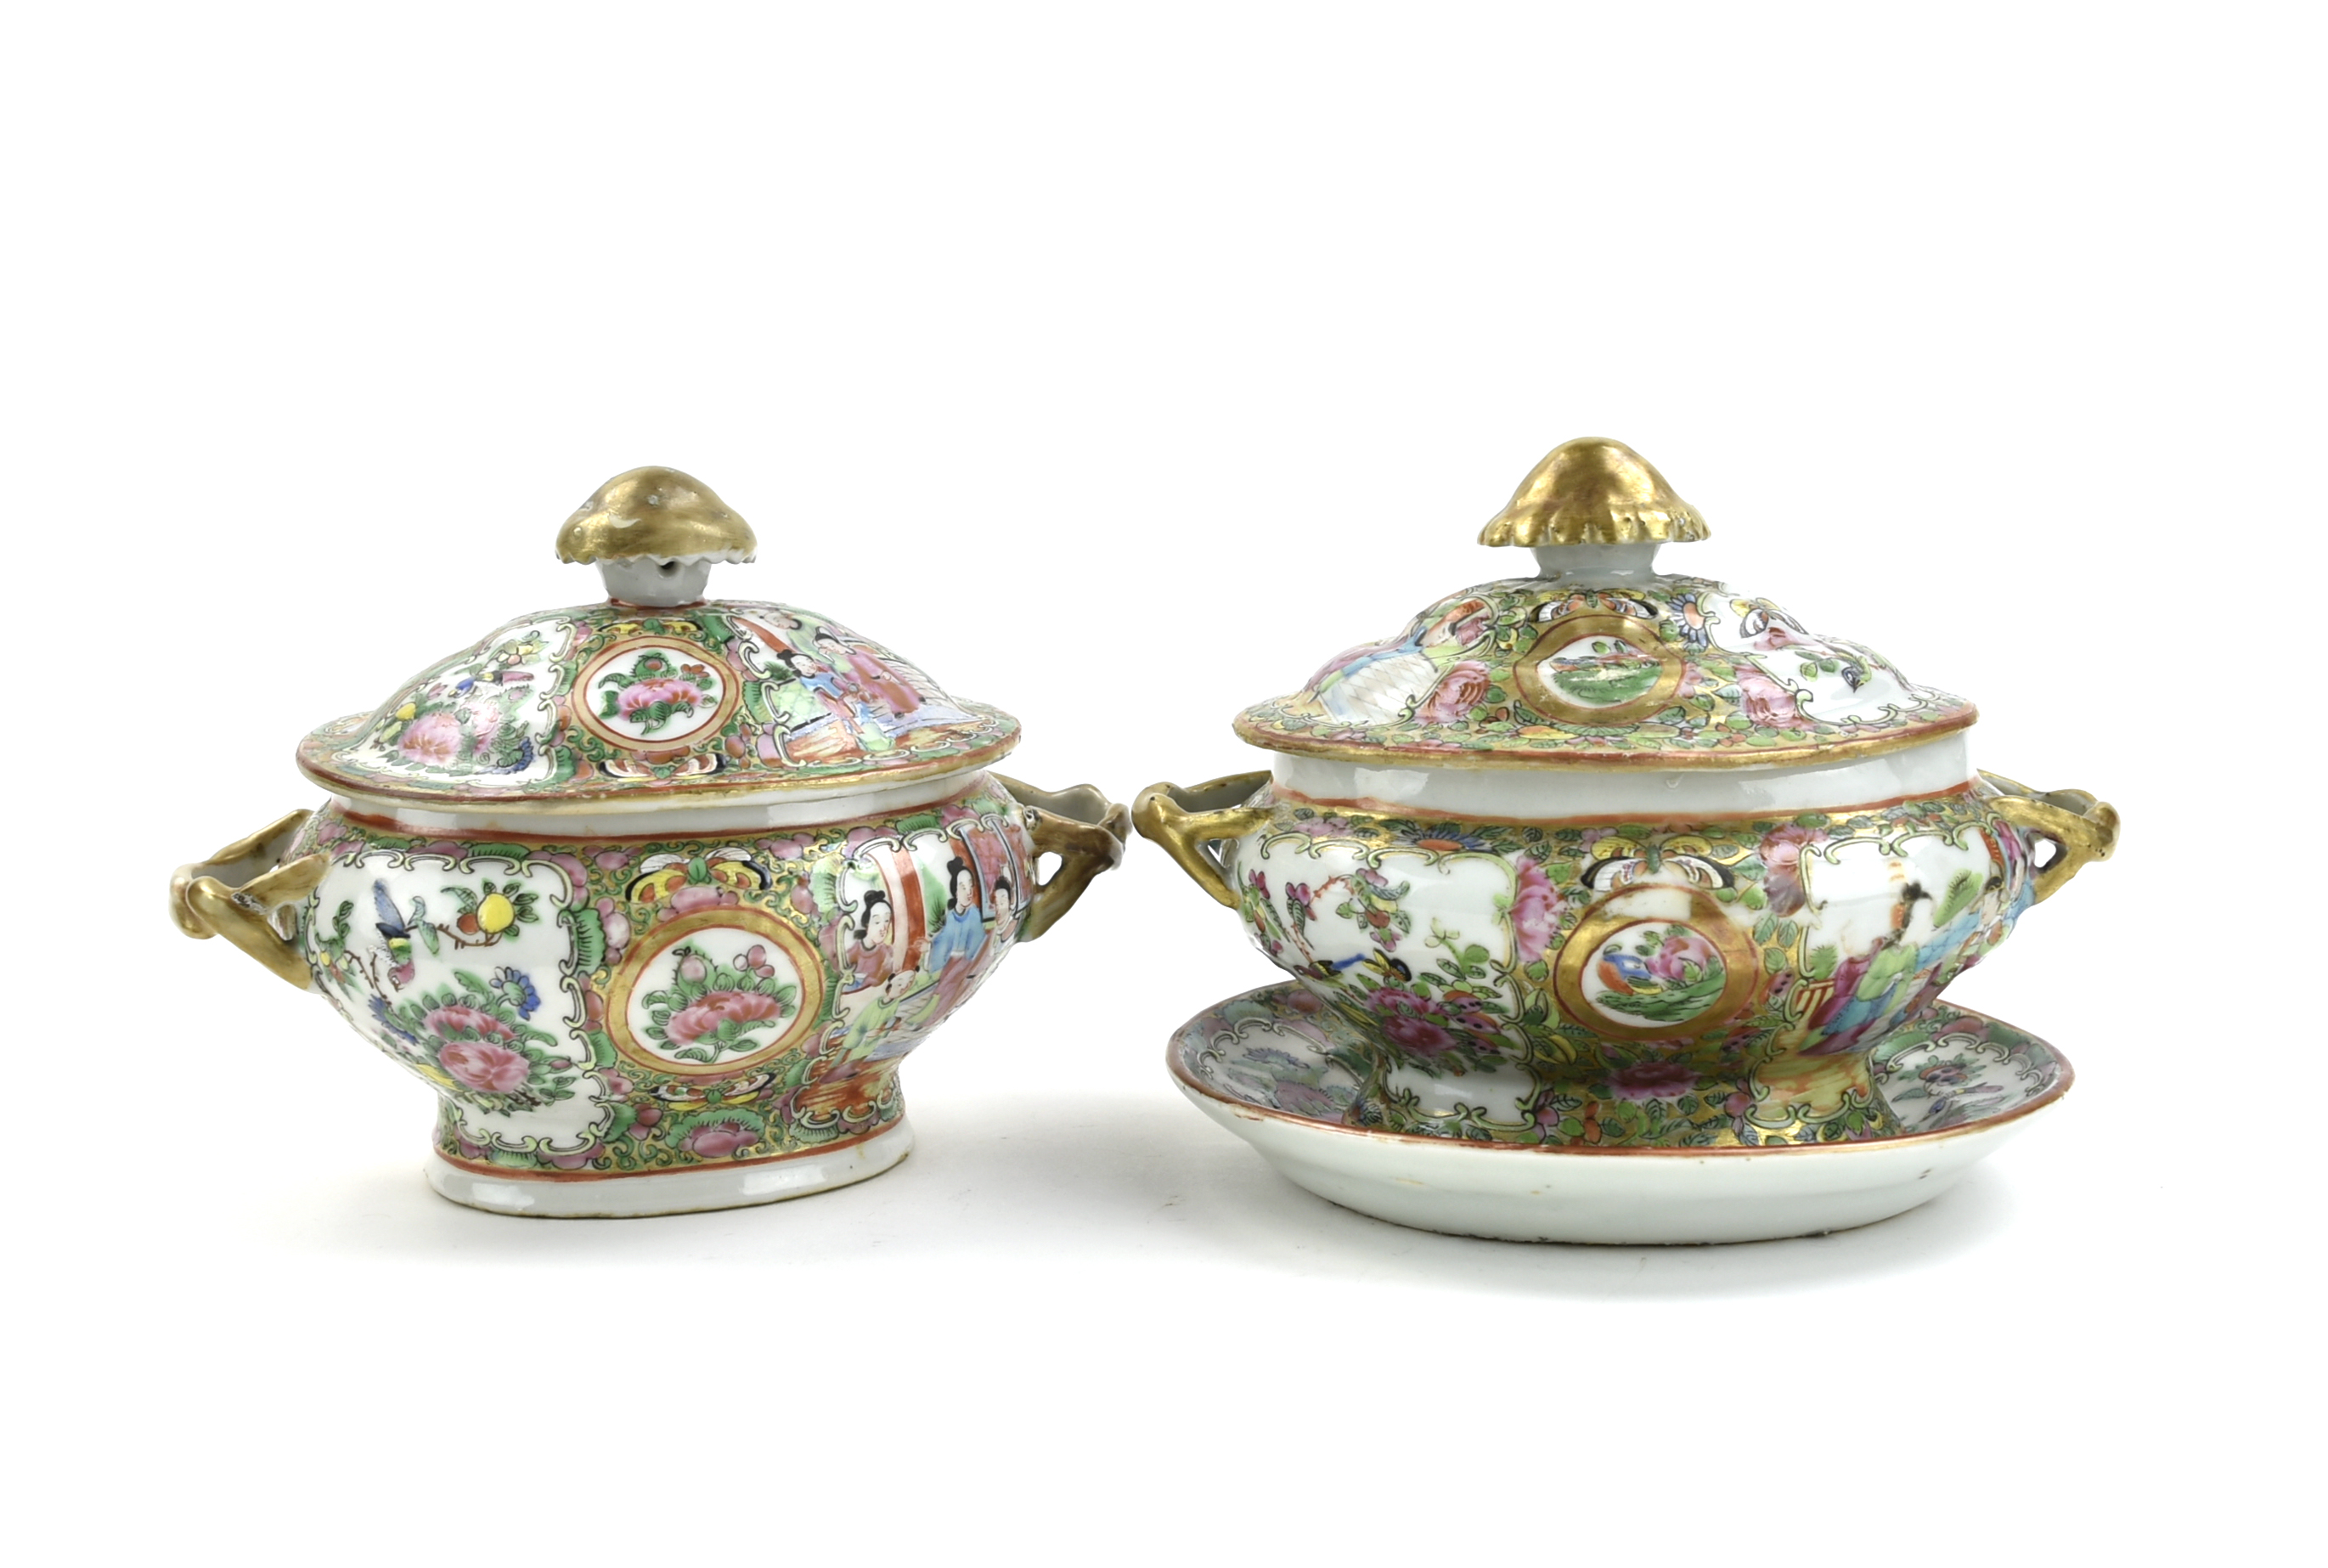 PAIR OF CHINESE CANTON GLAZED TUREENS,